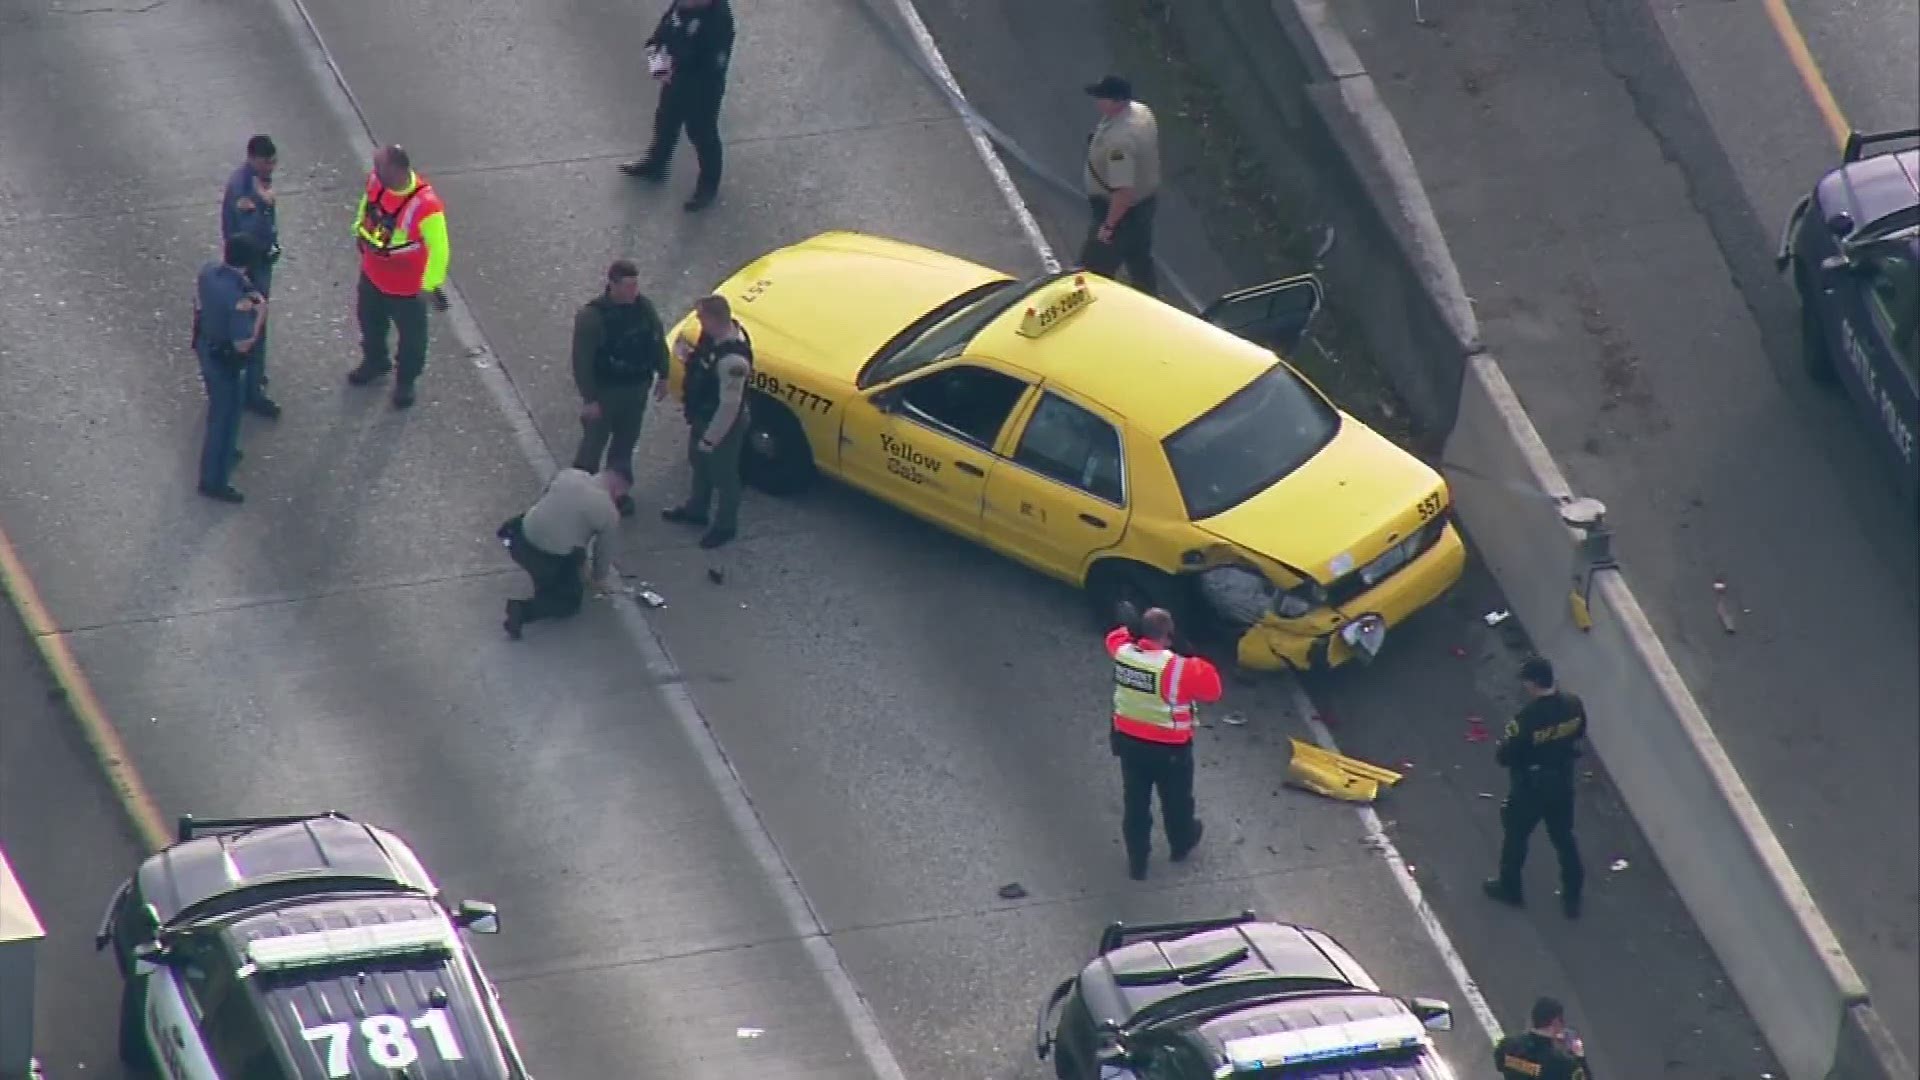 An armed robbery involving a yellow cab led to a police pursuit on I-5 Wednesday afternoon. The pursuit ended in a crash on southbound I-5 near Northgate.